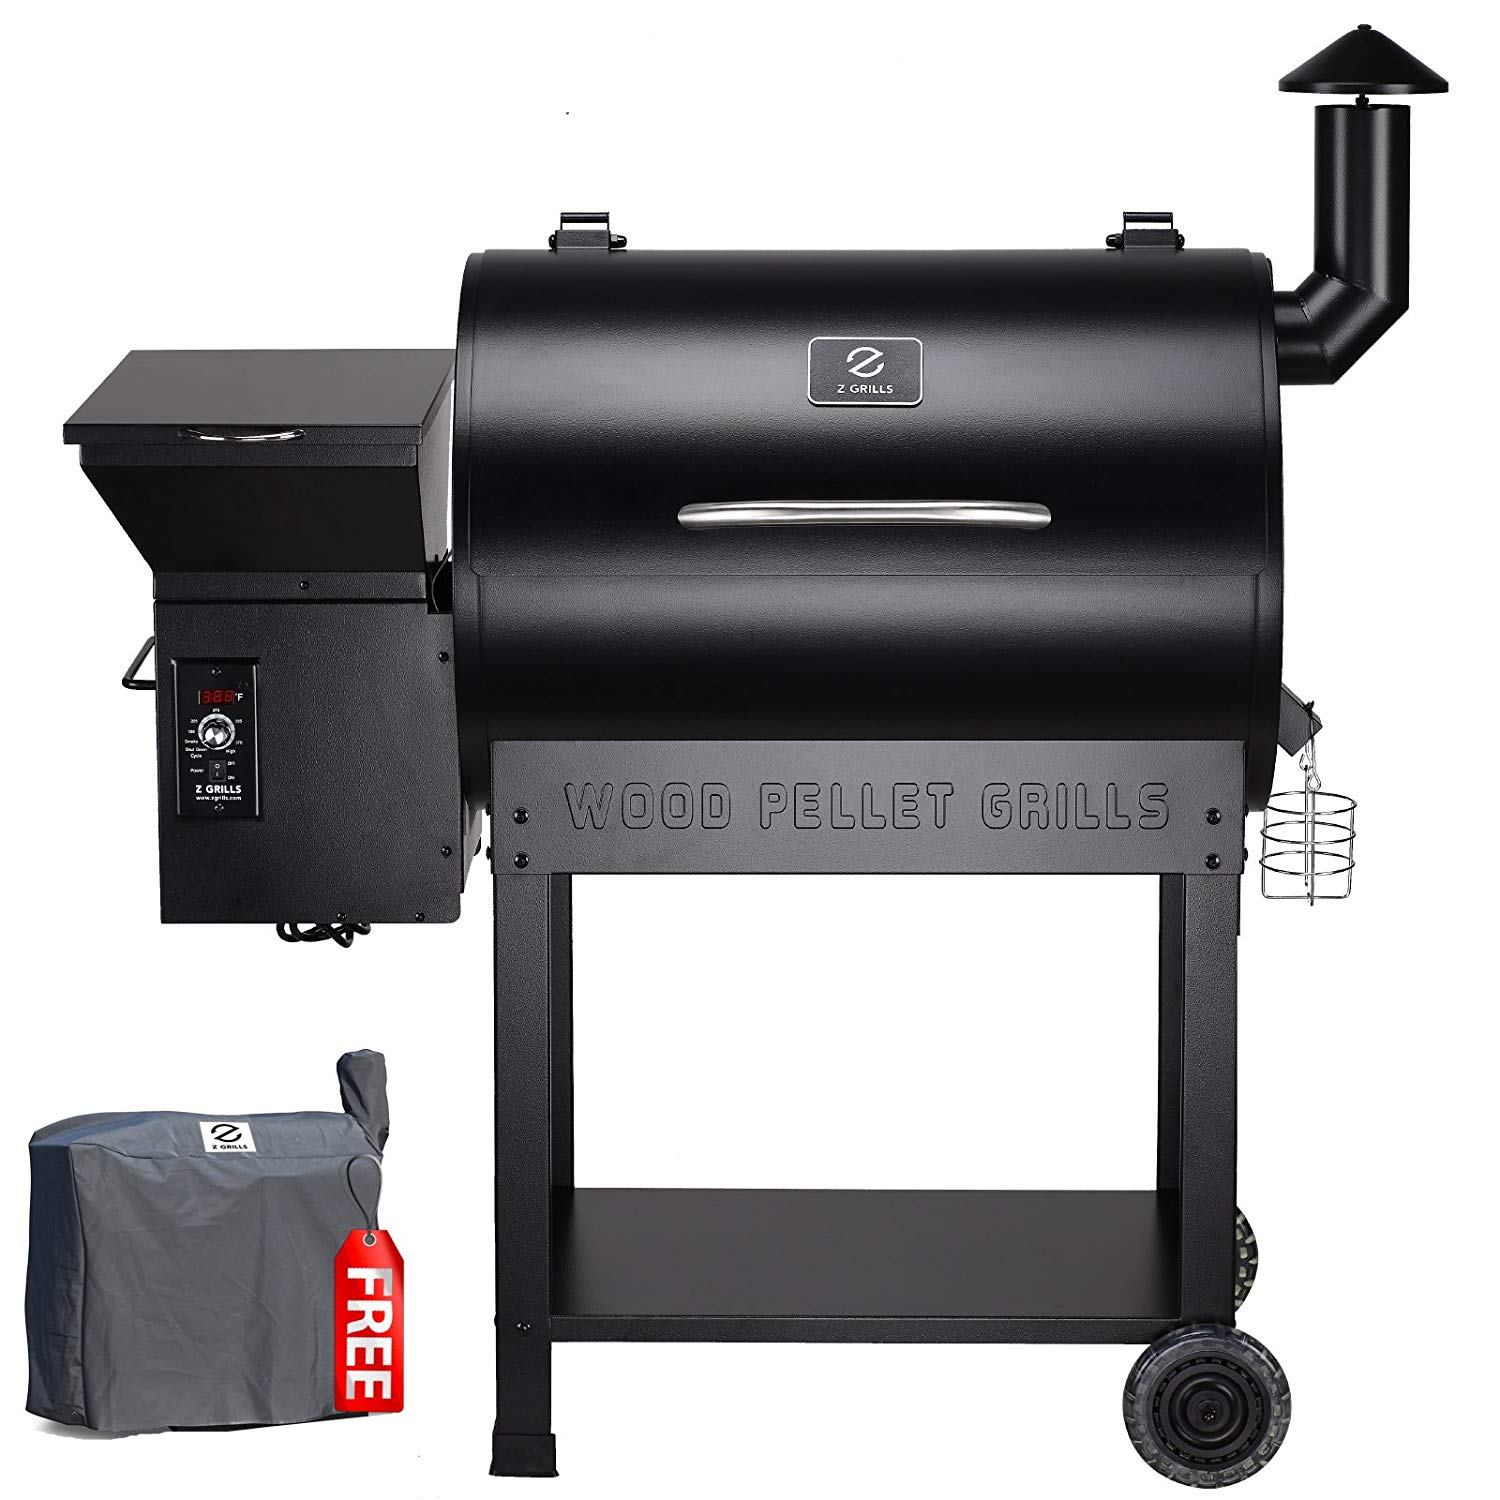 Z Grills ZPG-7002 Wood Pellet Grill & Smoker, 8 in 1 BBQ Grill Auto Temperature Control, 700 sq inch Cooking Area, Black - image 1 of 6